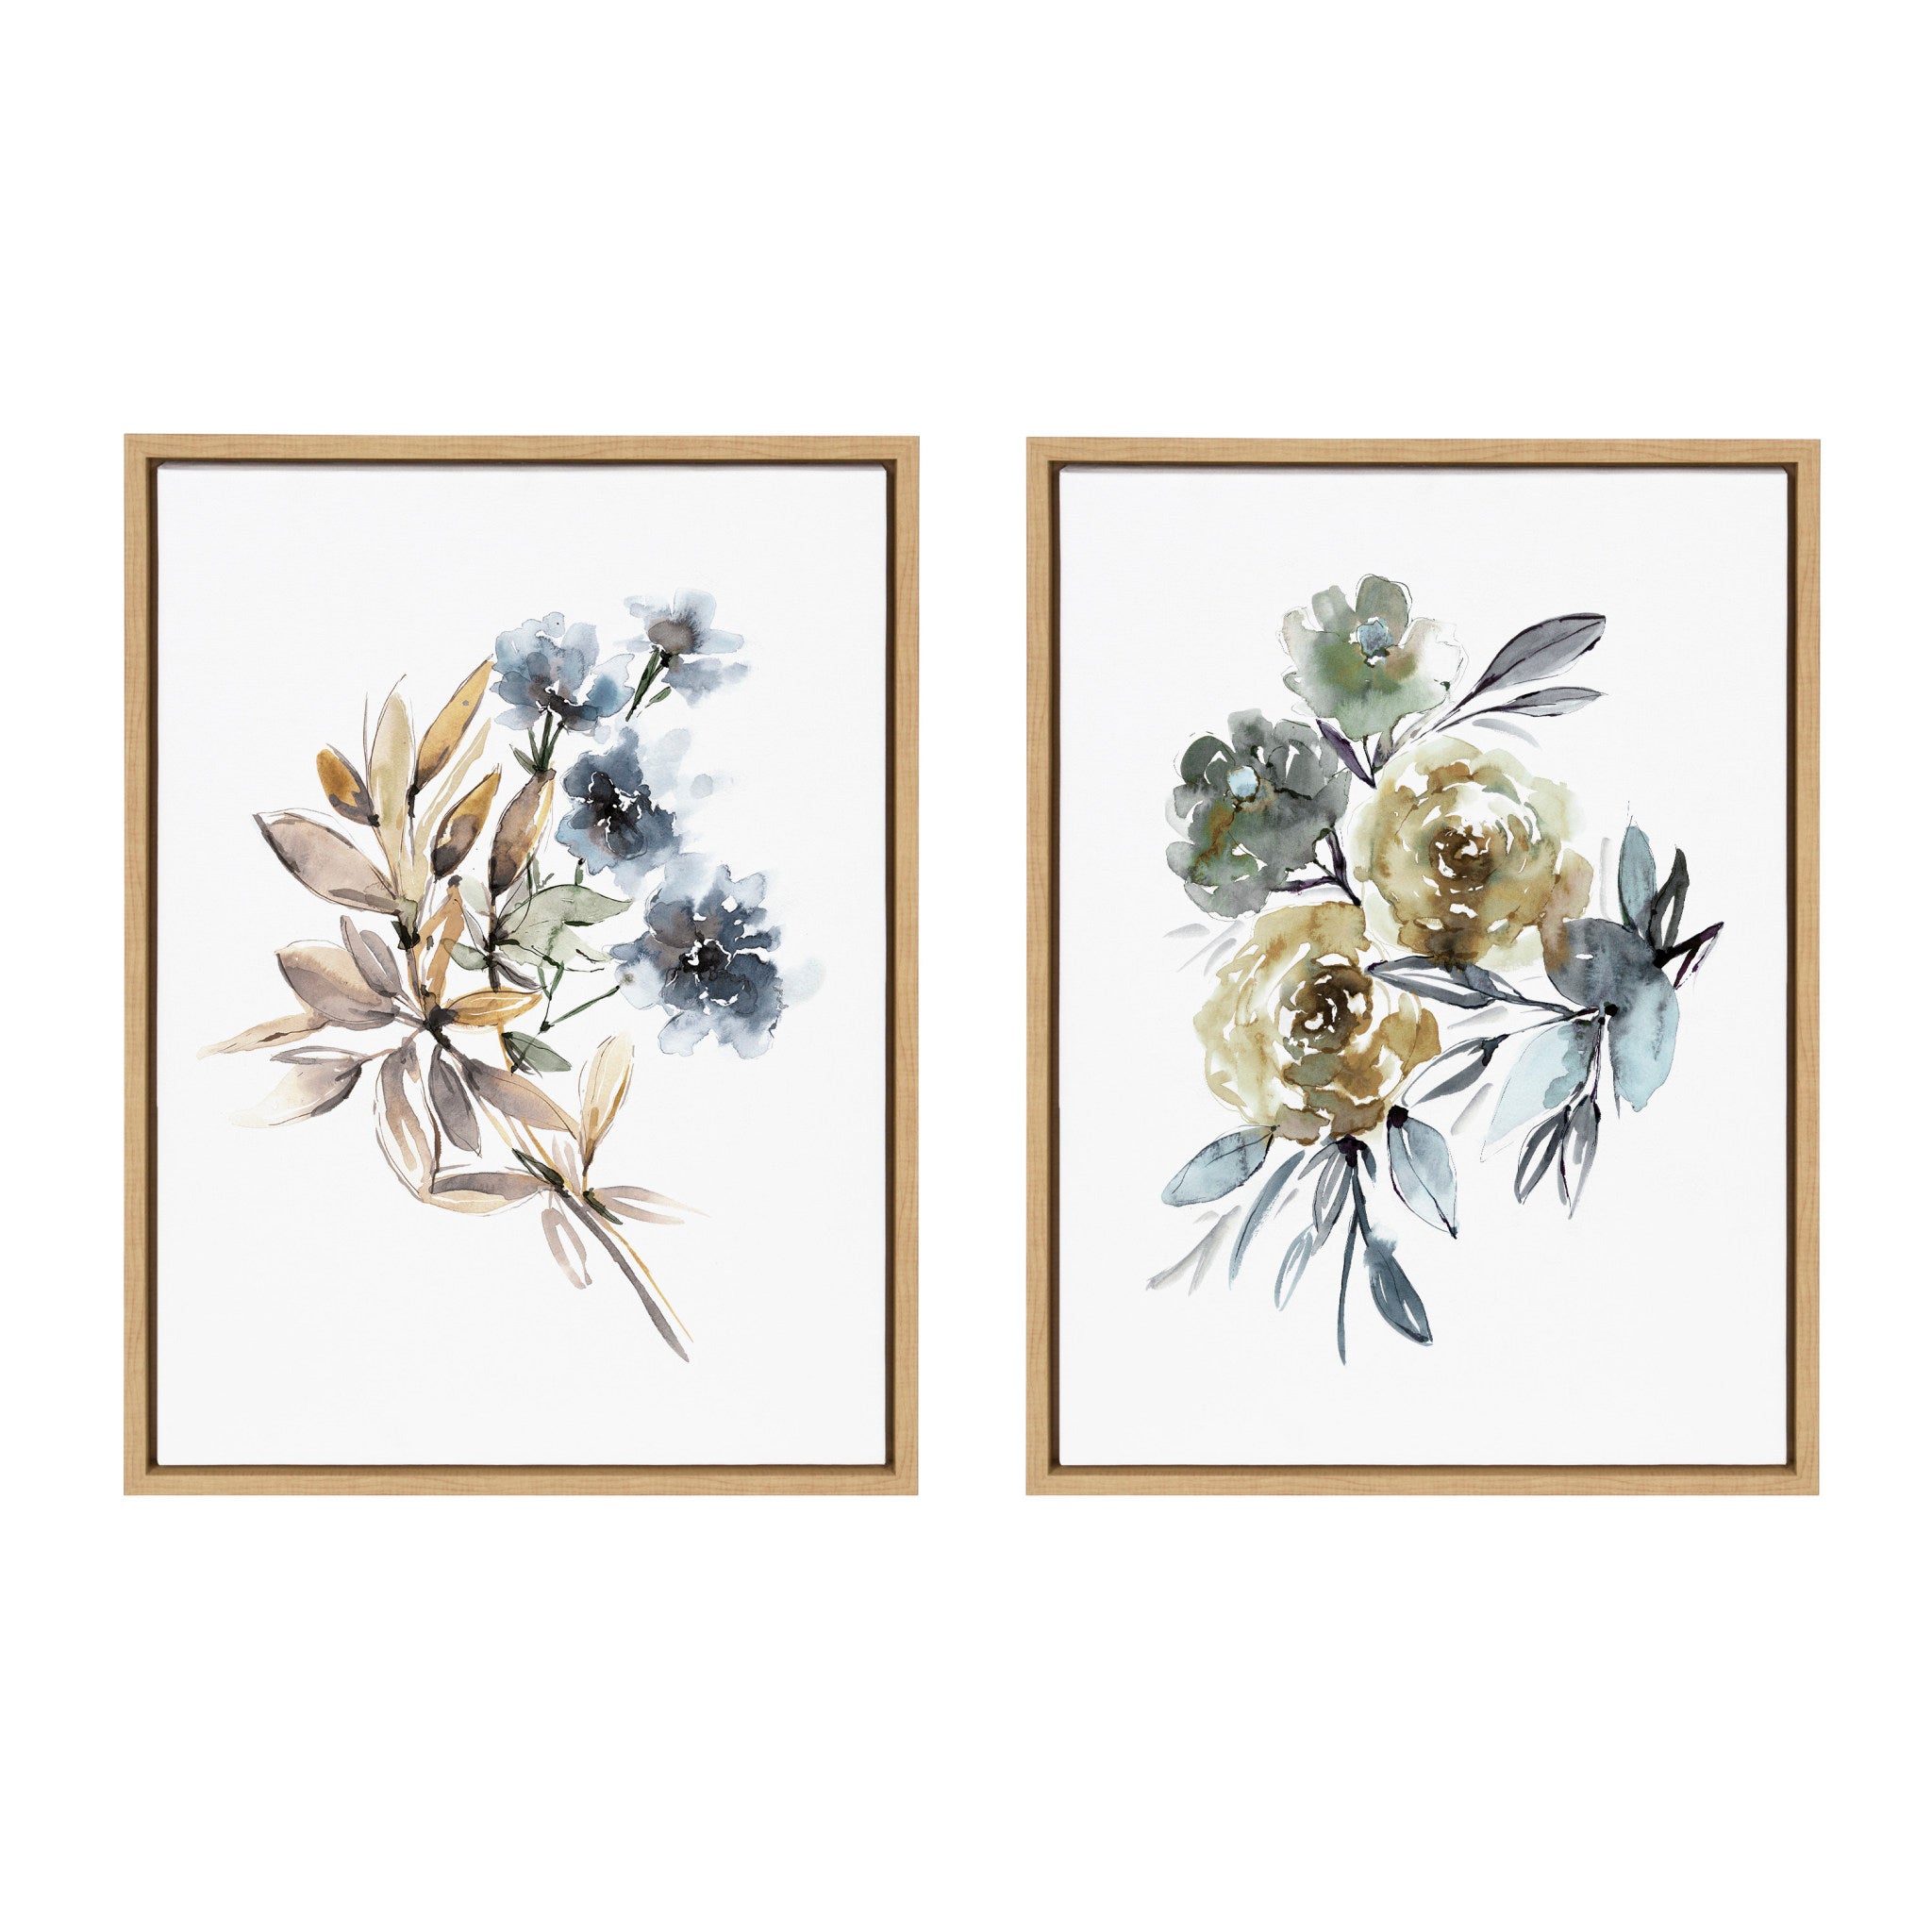 Sylvie Yellow Roses and Muted Blue Flowers Framed Canvas Art Set by Sara Berrenson